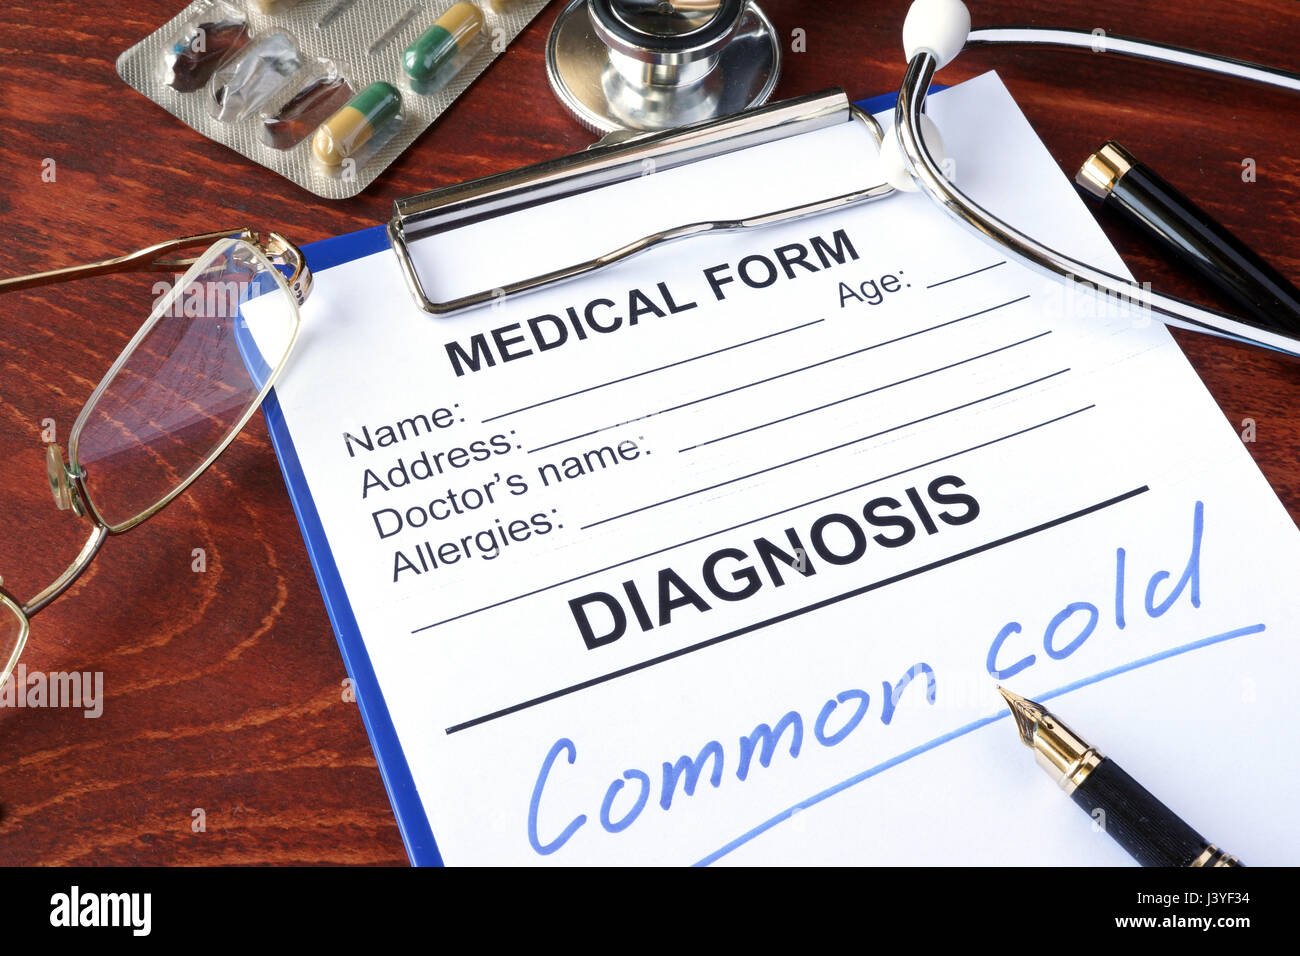 Medical form with diagnosis Common cold in a hospital. Stock Photo